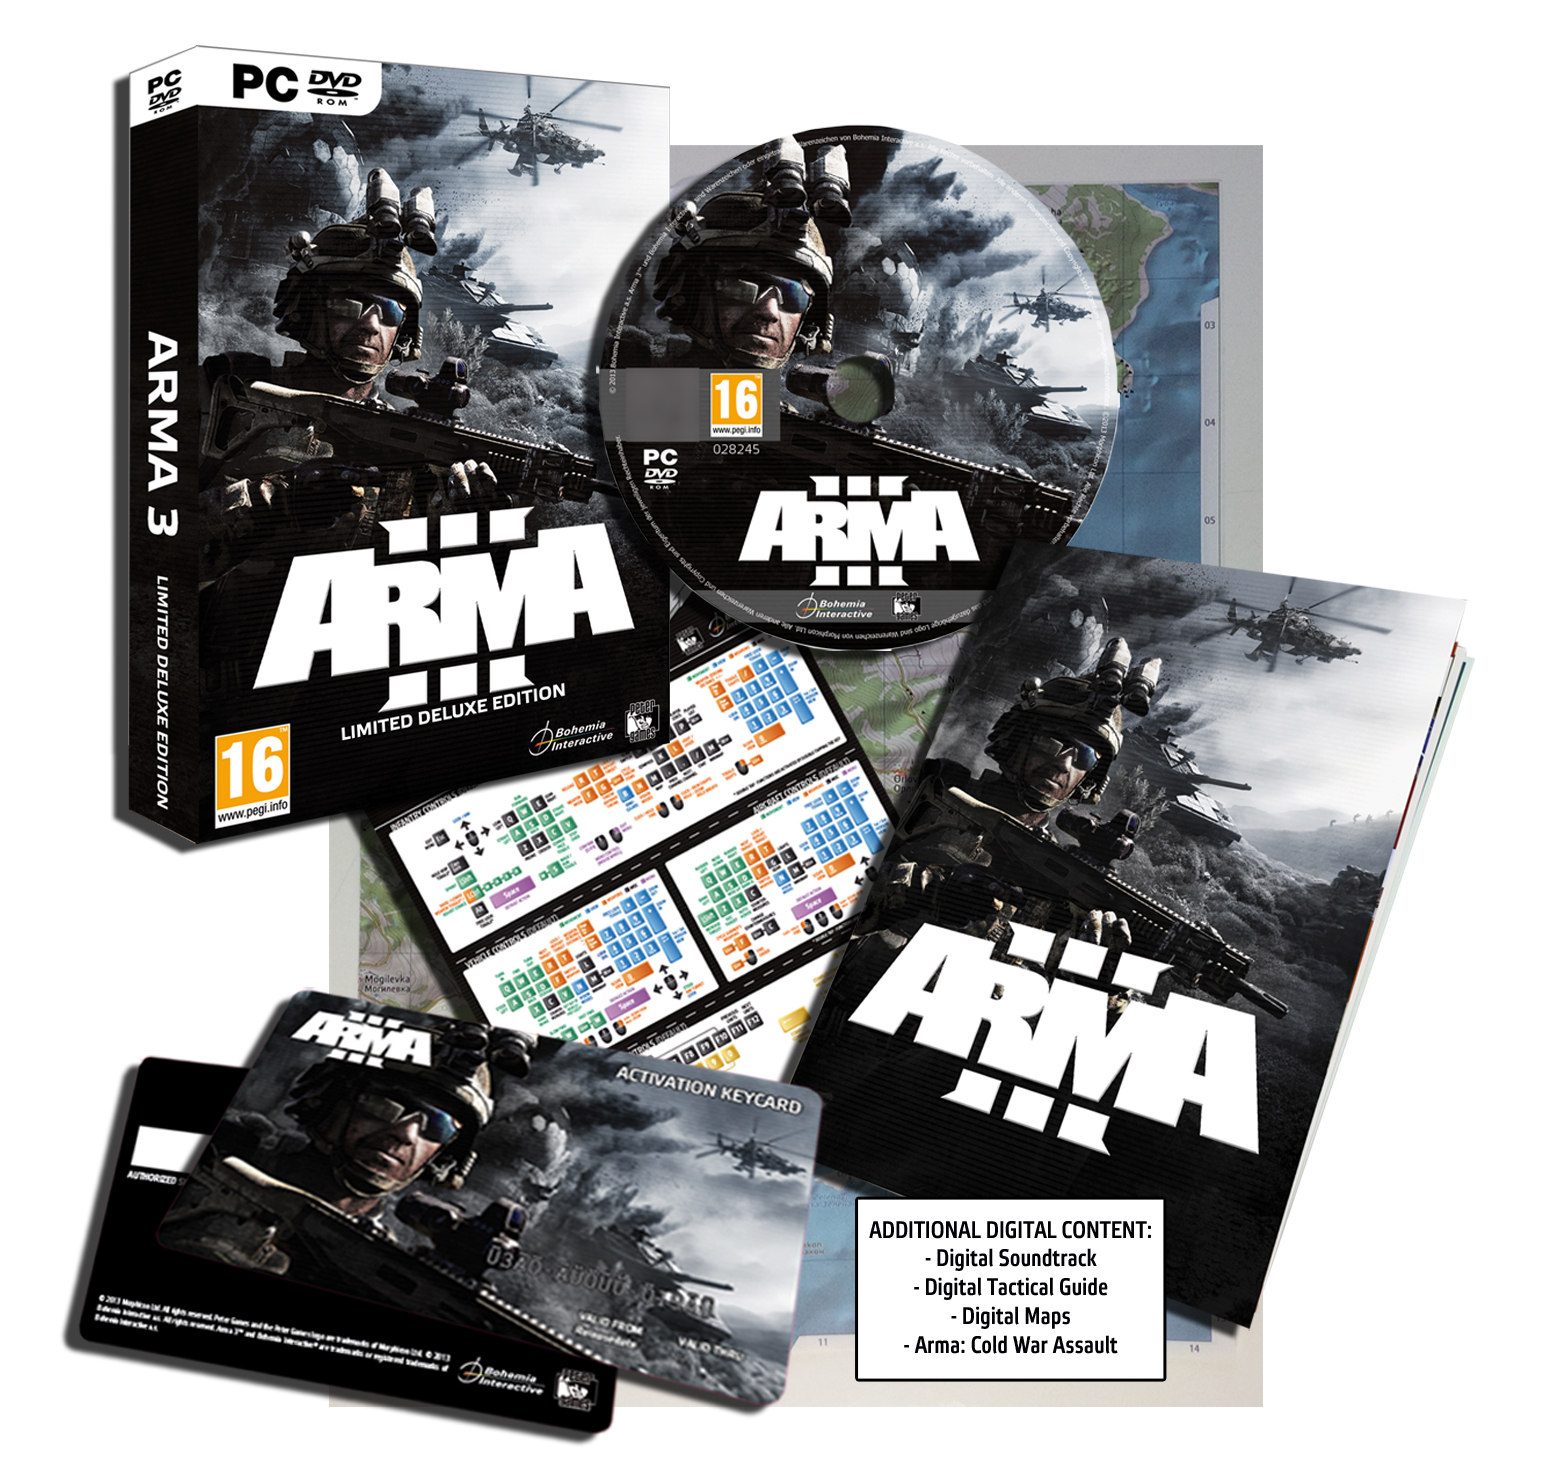 ARMA 3 Beta Release Confirmed for June 25th